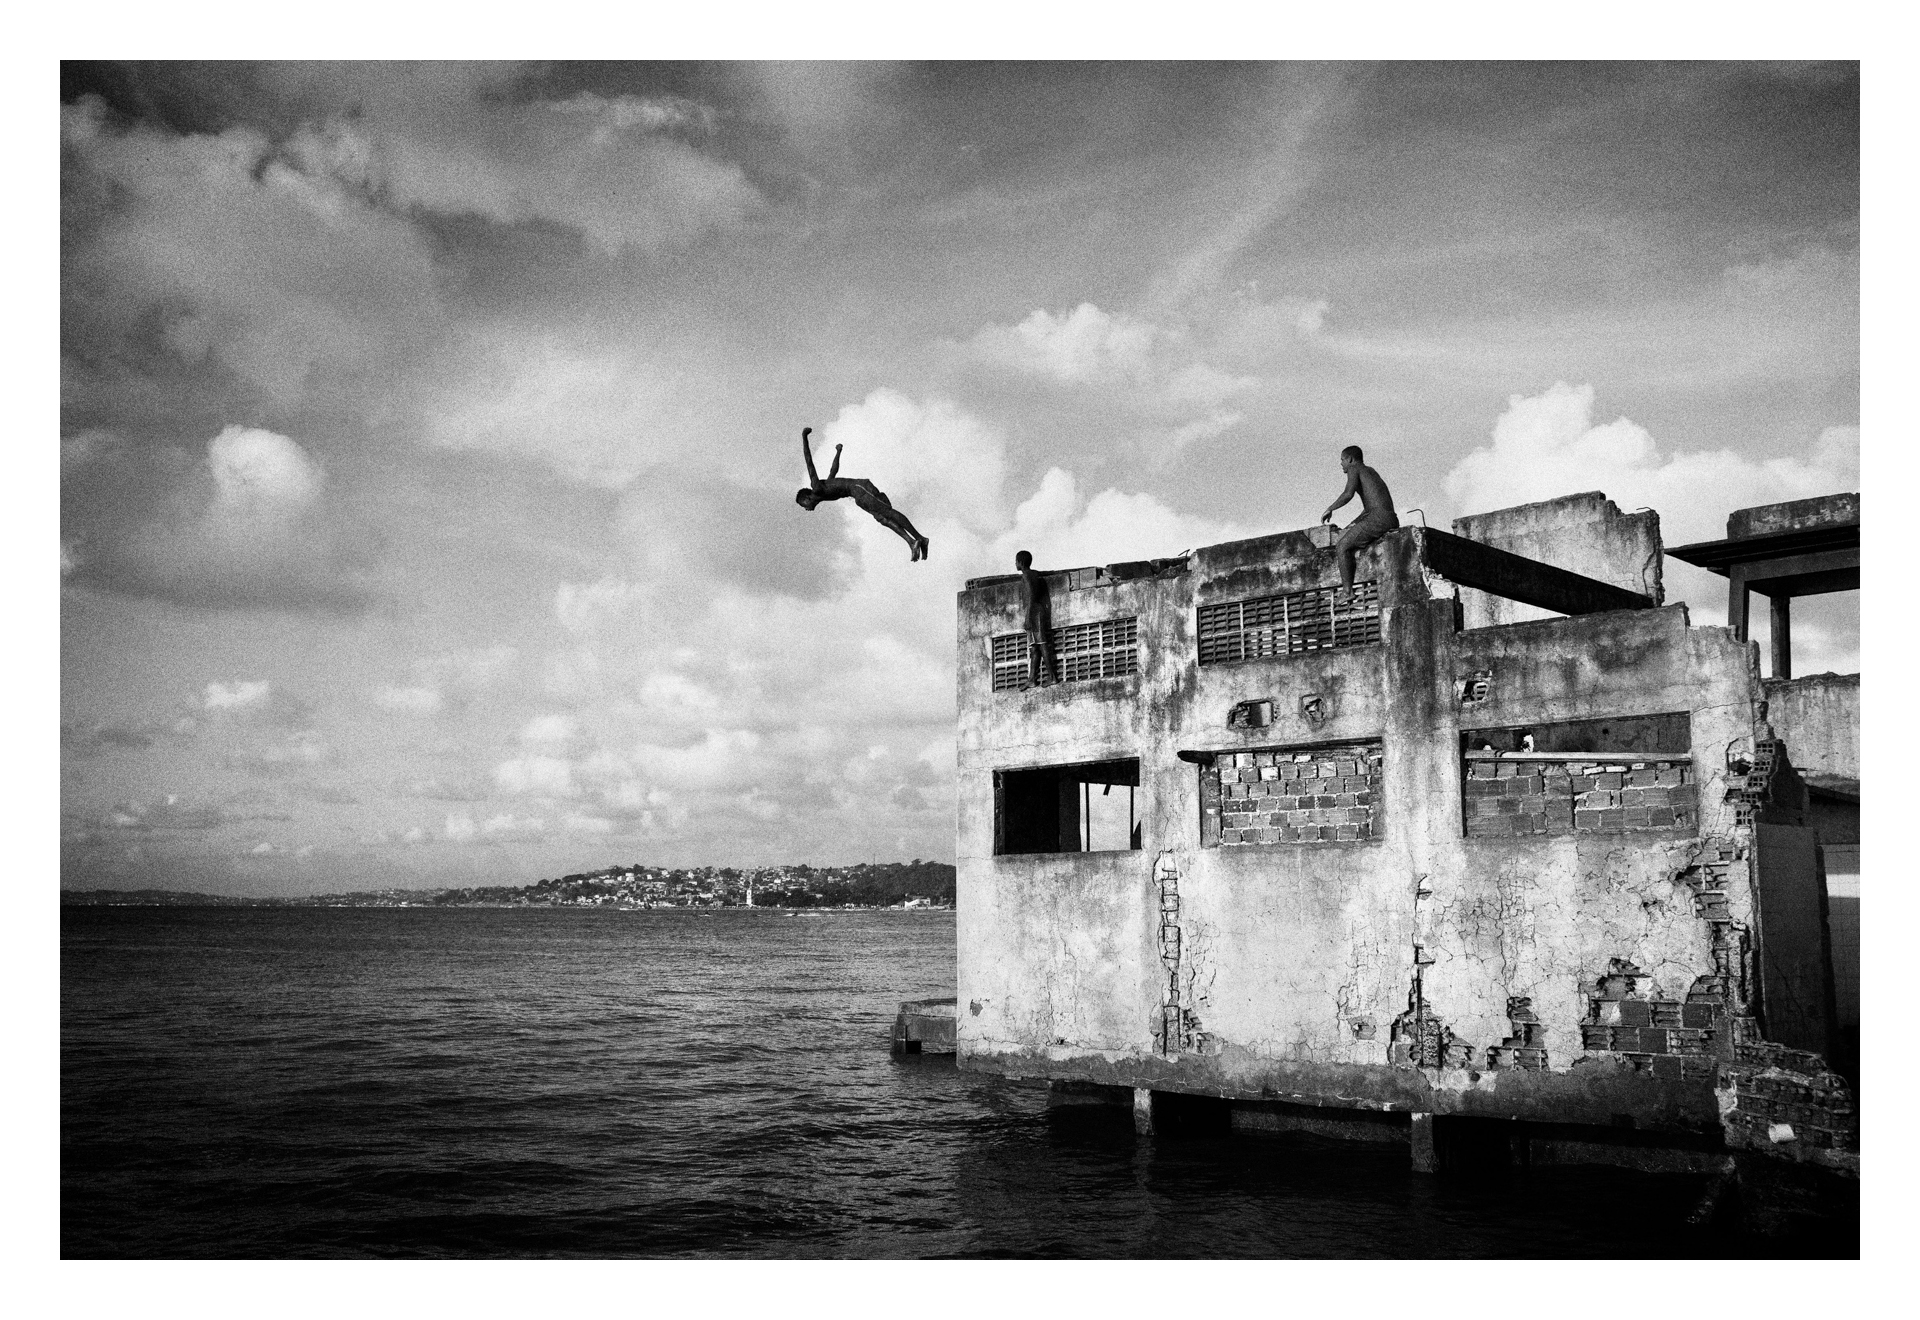  SALVADOR DE BAHIA, BRAZIL ? MARCH 20, 2011: A boy jumping from a building of the abandoned chocolate factory, on March 20, 2011 in Salvador de Bahia, Brazil. Despite the lack of socio-economic support from the government, they have managed to make a